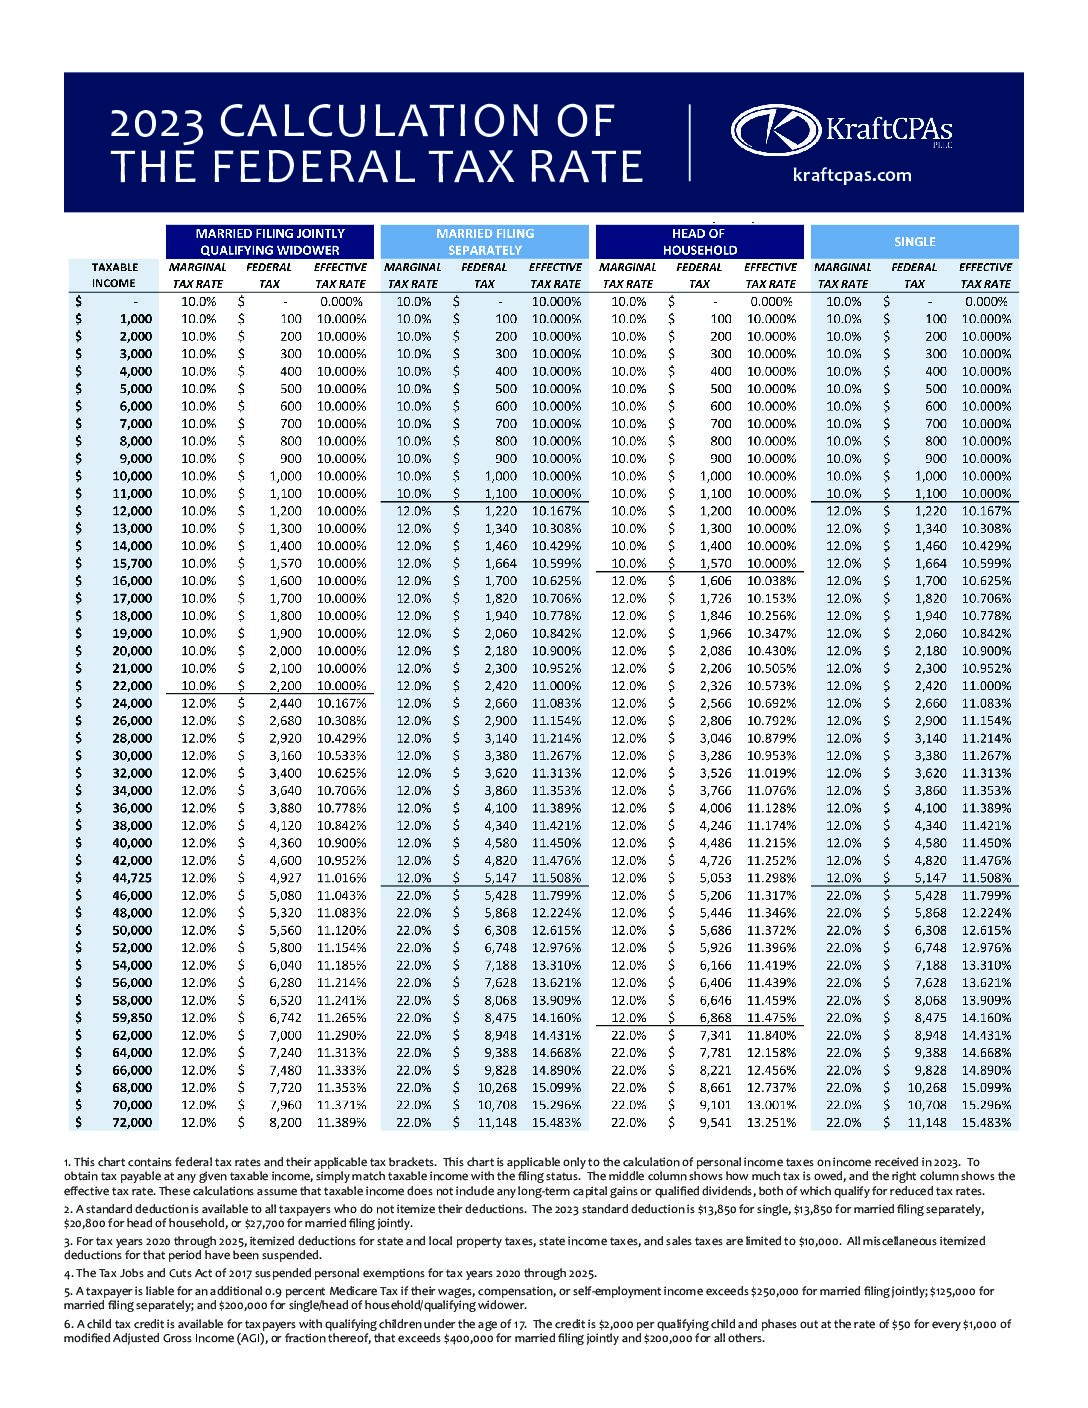 2023 Effective Federal Tax Rate Chart - KraftCPAs